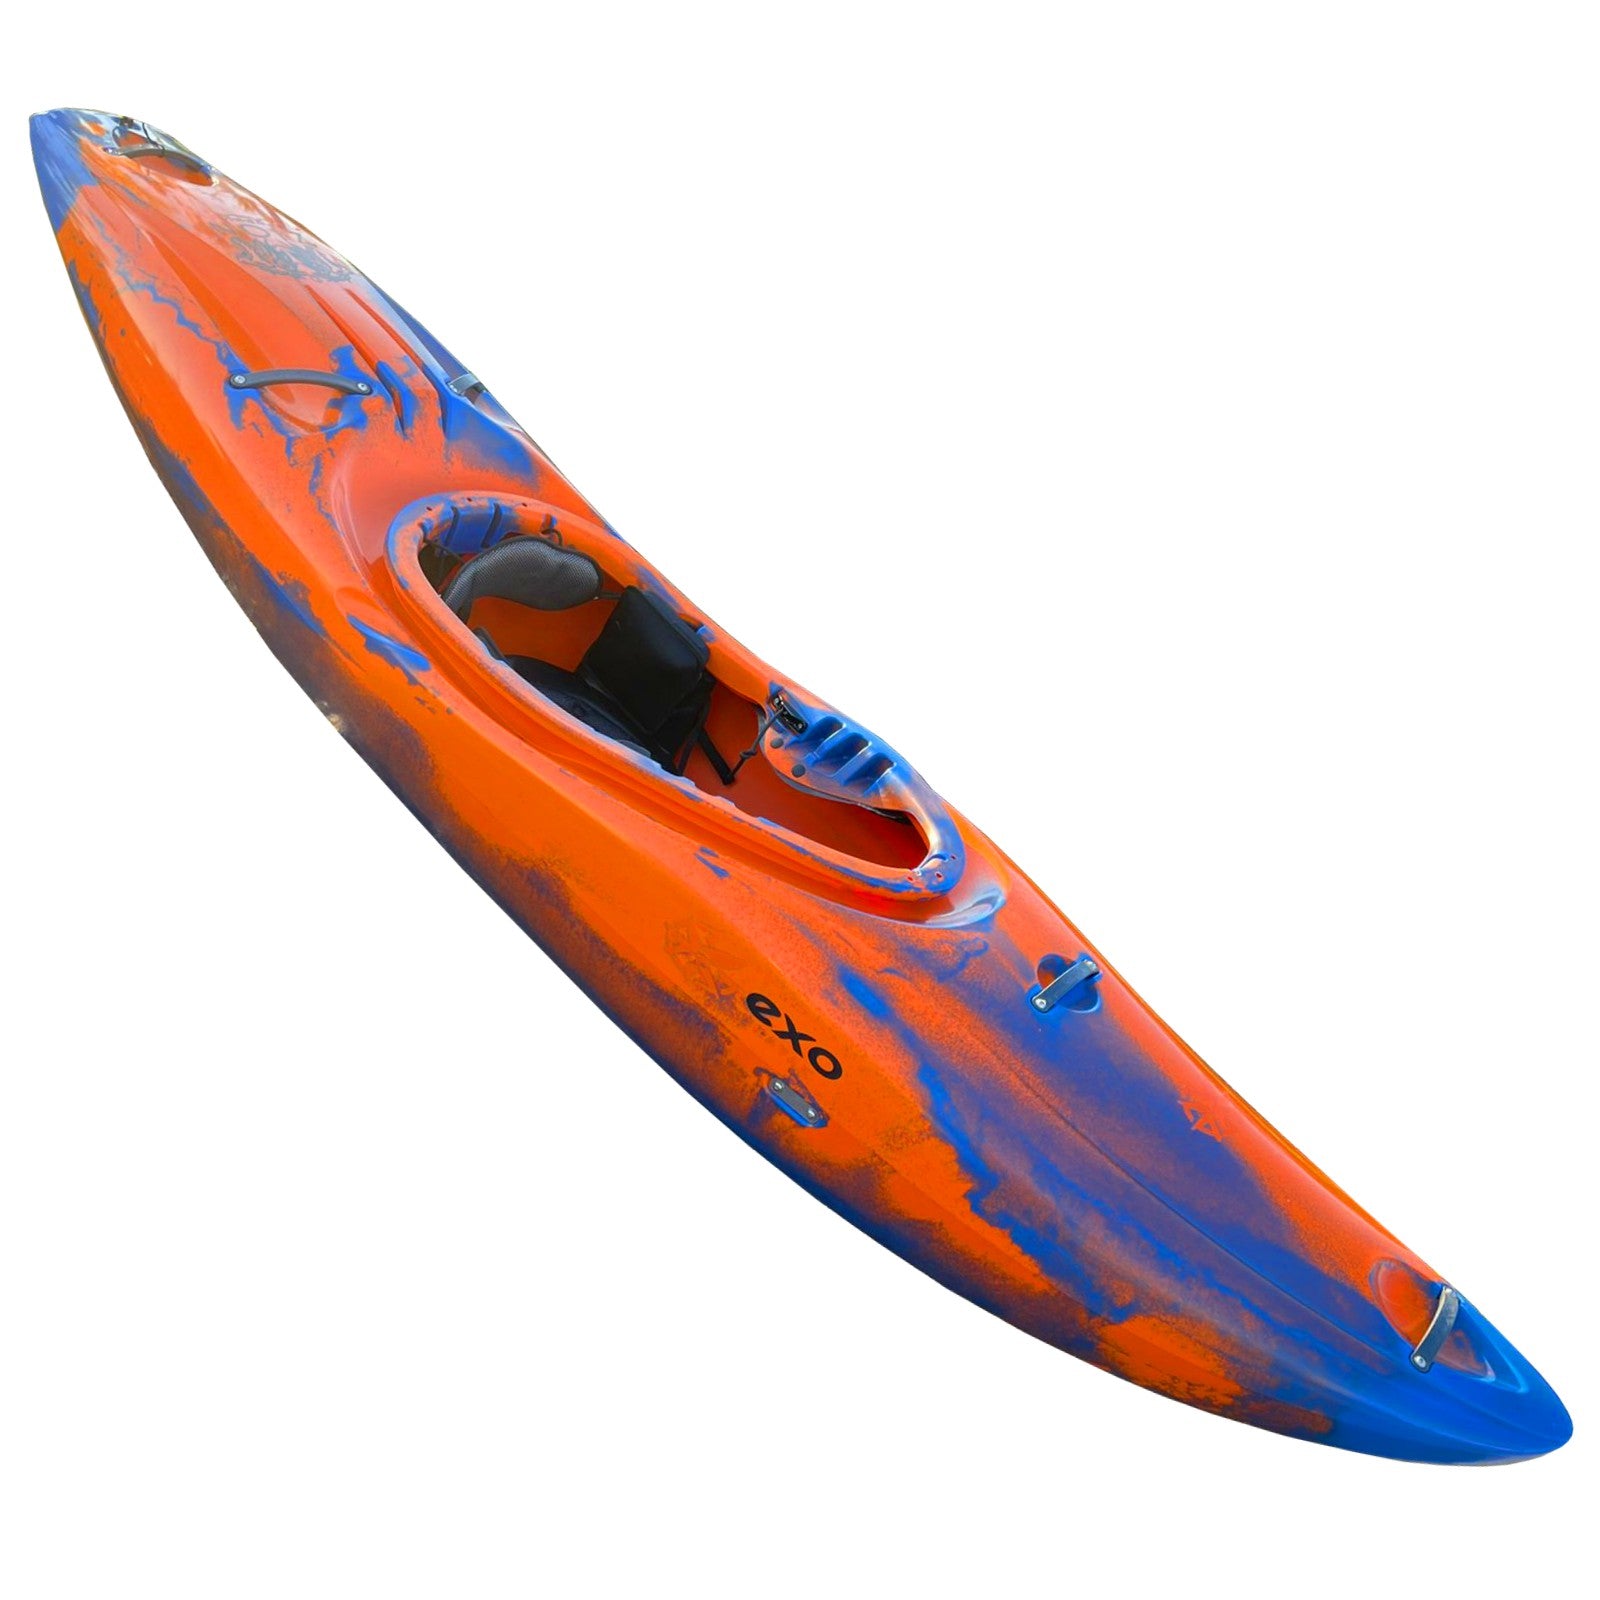 Learn to whitewater kayak, buy kayaks and SUPs in India.